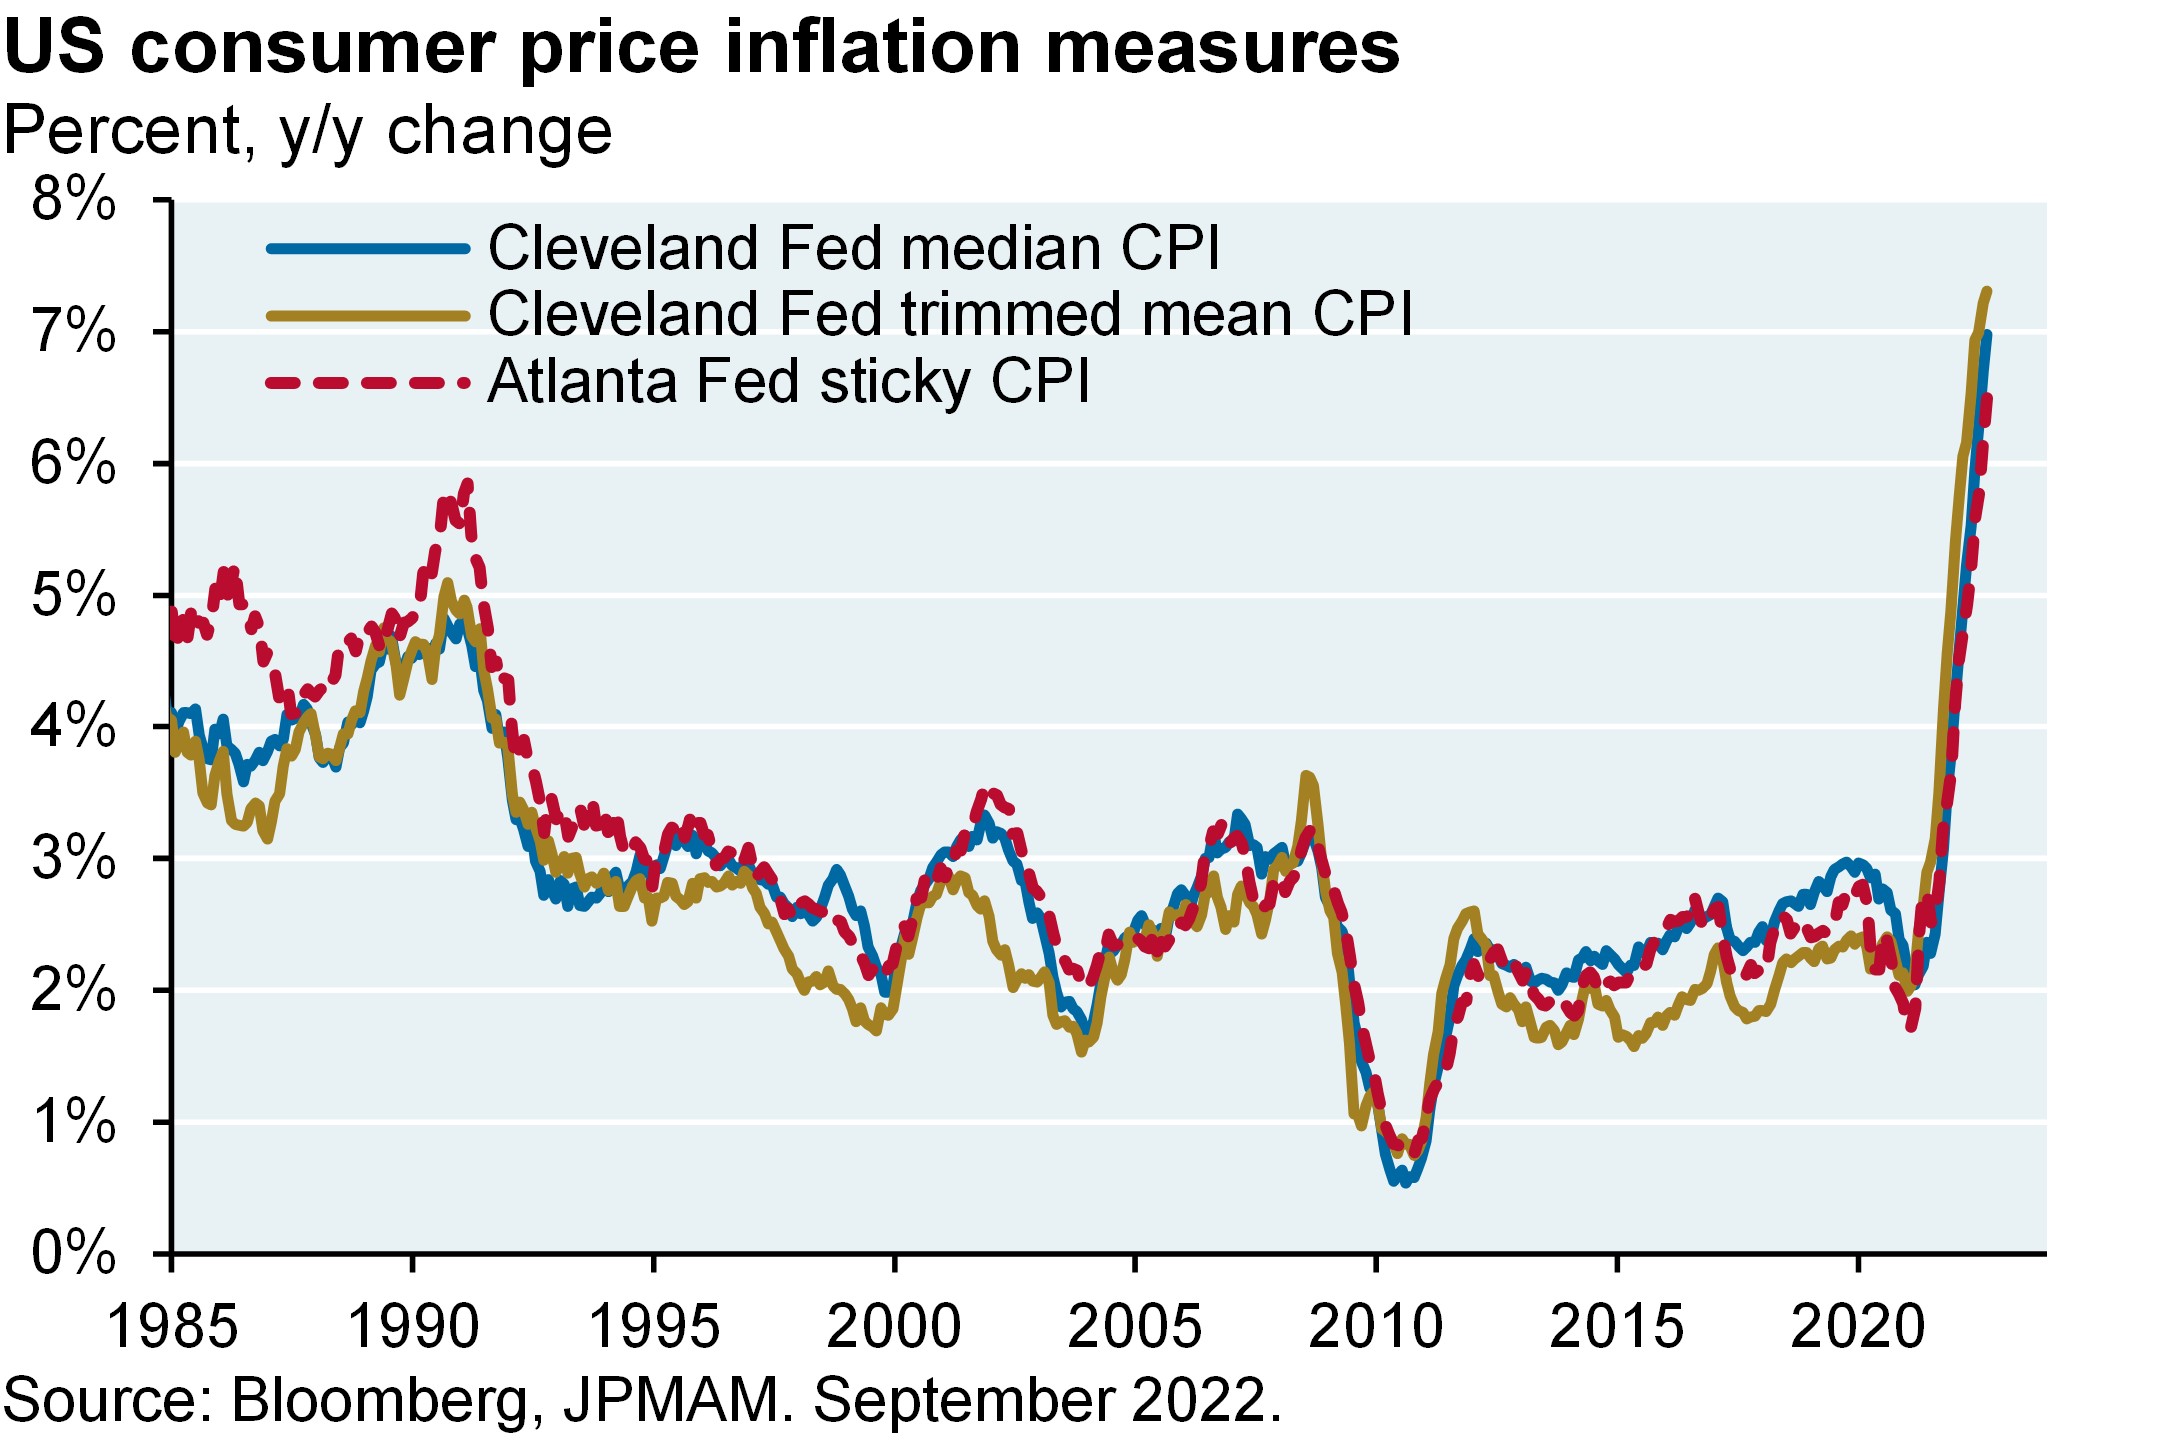 Line chart plots the year-over-year change in percent of three consumer price inflation (CPI) measures from 1985 to present: Cleveland Fed median CPI, Cleveland Fed trimmed mean CPI, and Atlanta Fed sticky CPI. All three CPI indicators are up about 7% year-over-year, their highest rate in the time period shown.